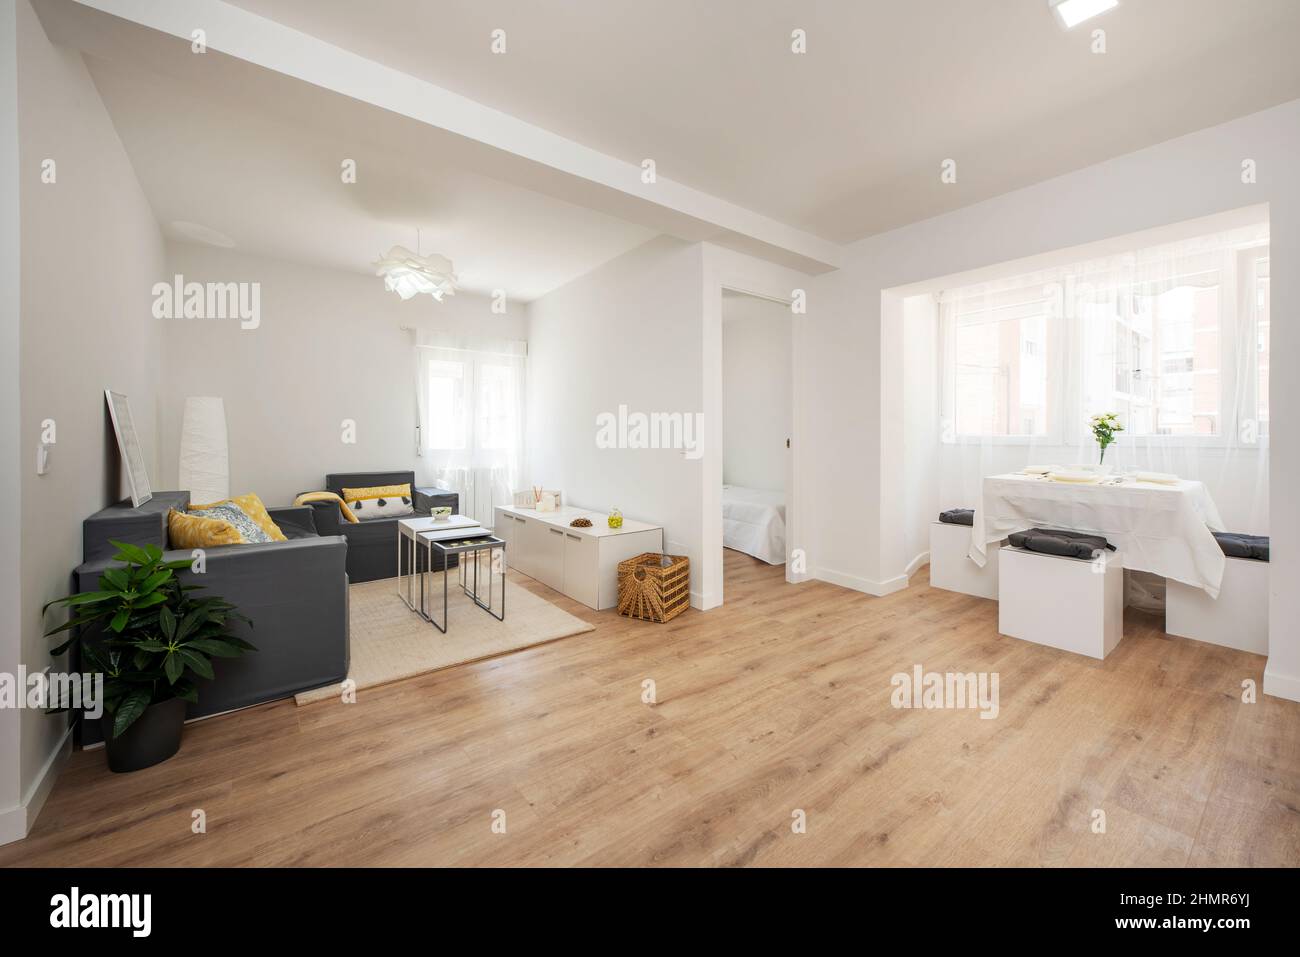 Large open space in an apartment furnished with chestnut wood flooring and decorative artificial plants Stock Photo